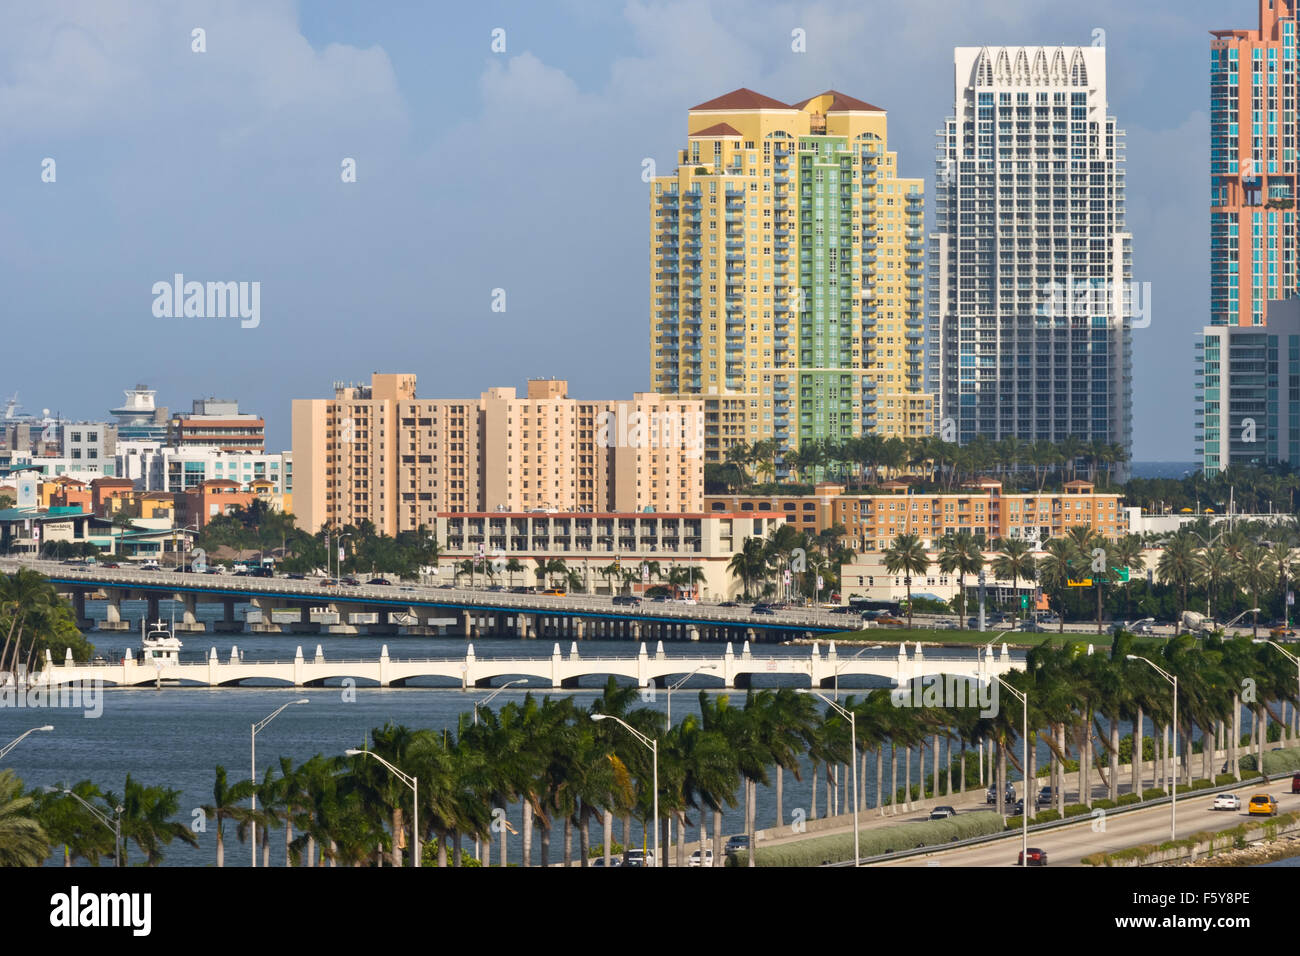 View of South Beach from the port of Miami with the different roads and bridges in the foreground. Stock Photo